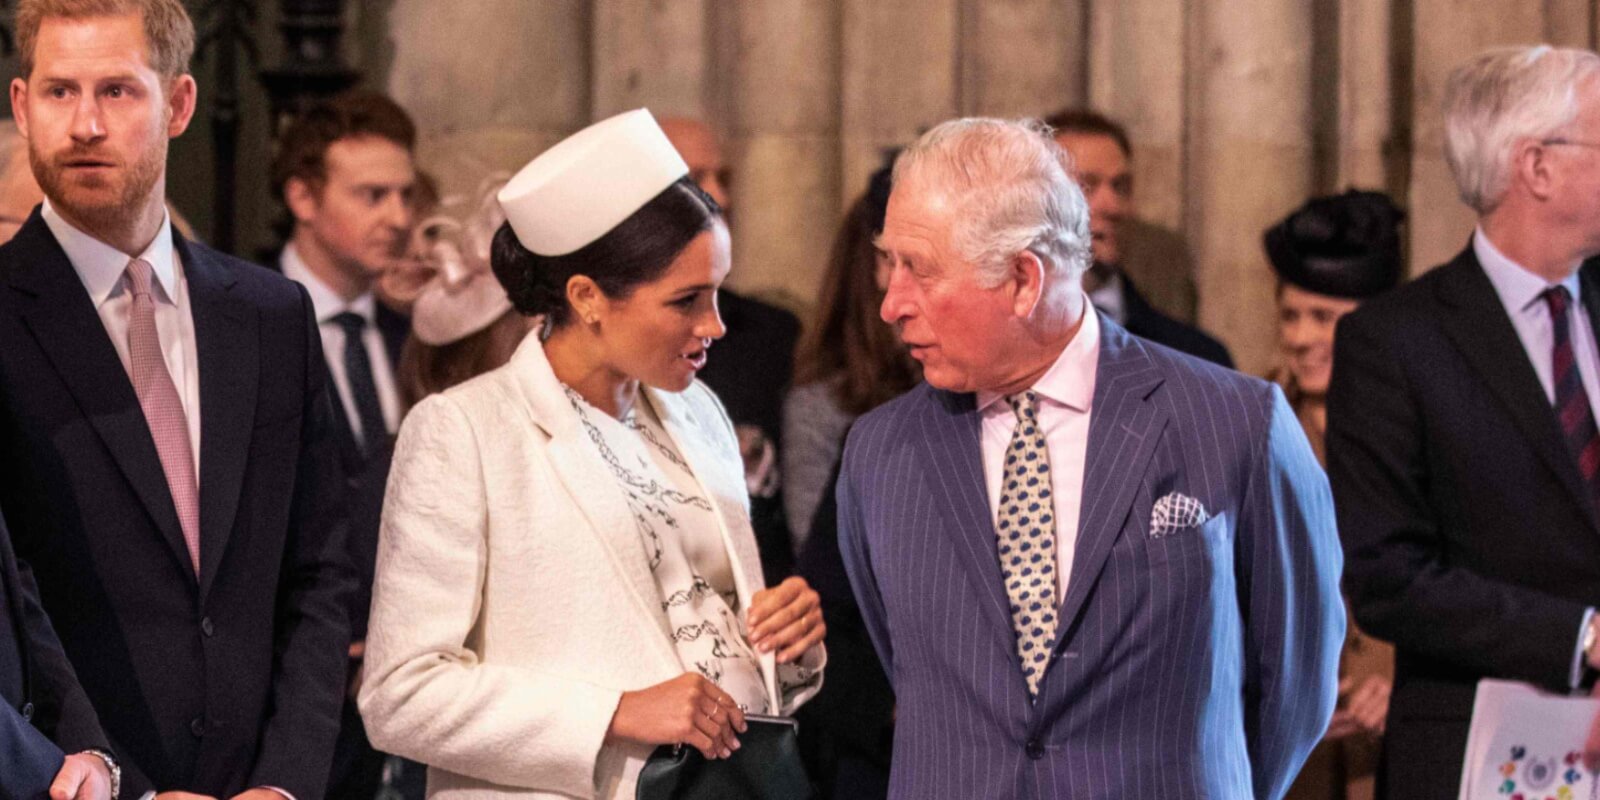 Prince Harry, Meghan Markle and King Charles photographed at the Commonwealth Day service at Westminster Abbey in London on March 11, 2019.